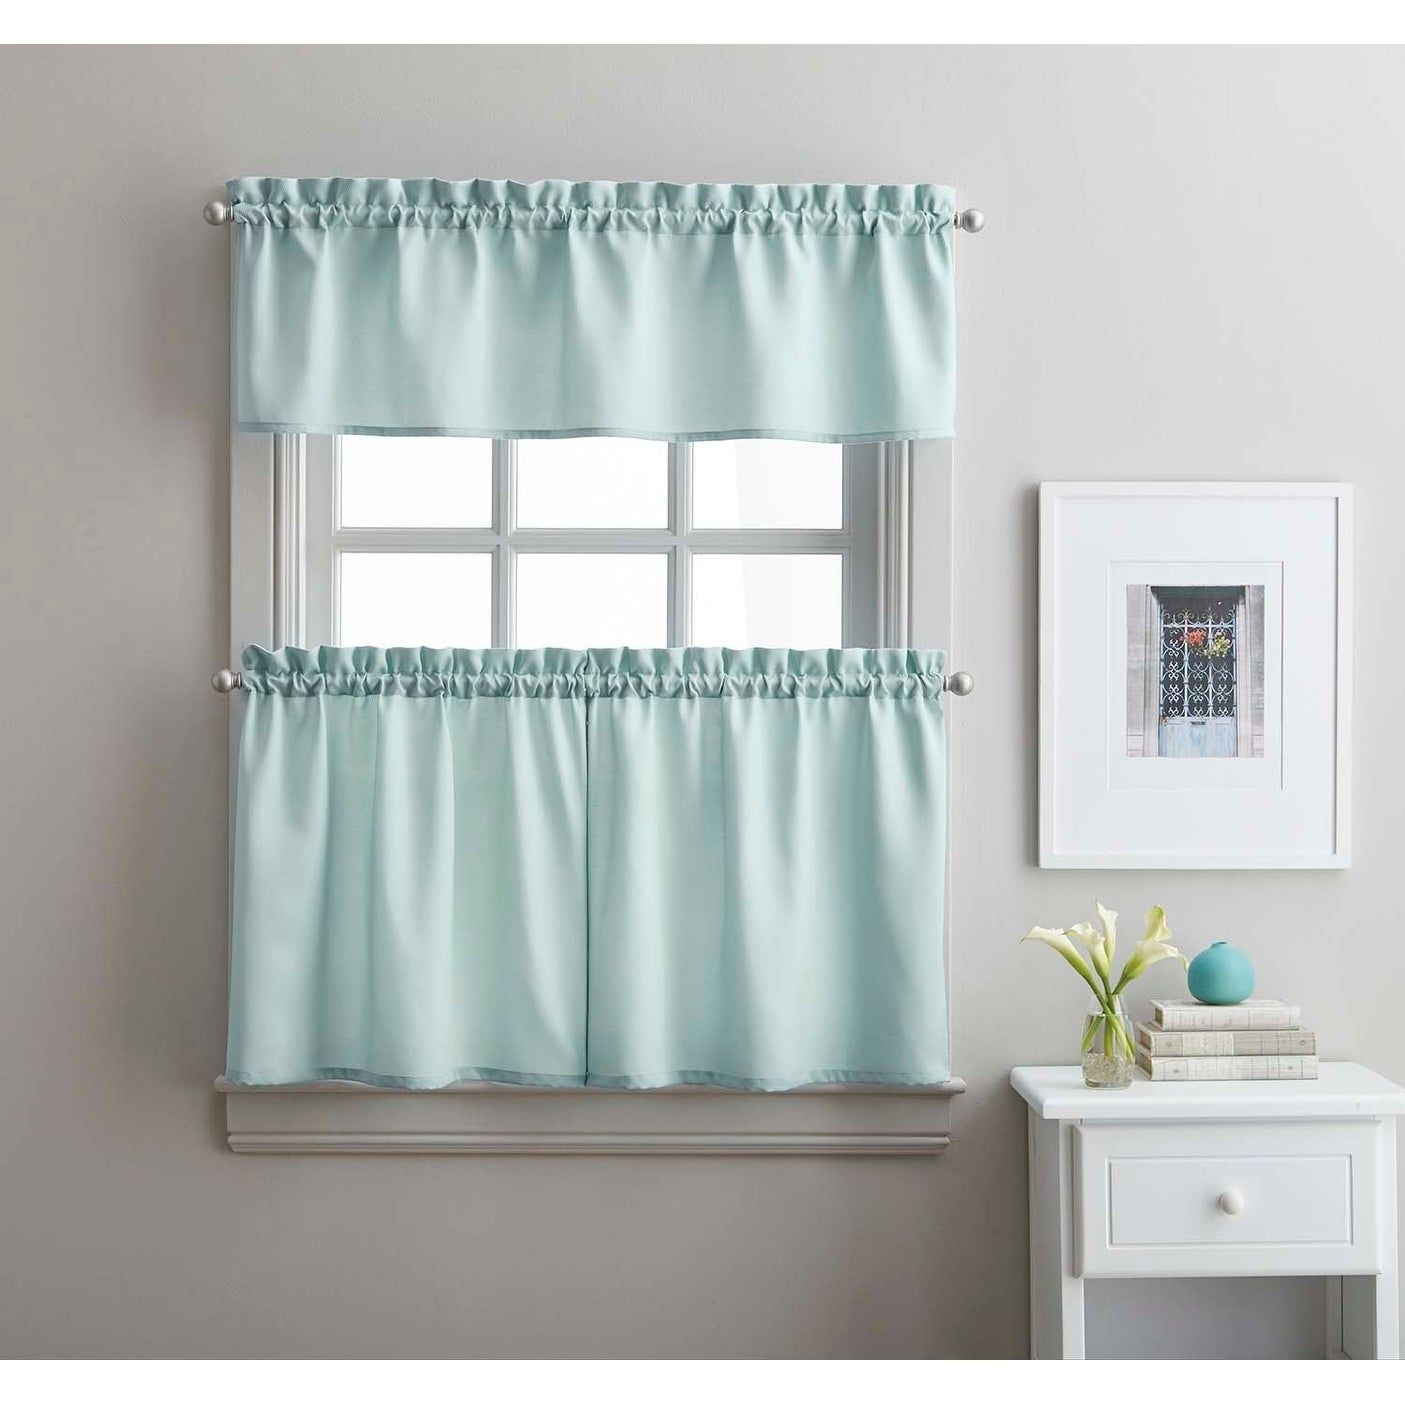 Twill 3 Piece Kitchen Curtain Tier Set Within Microfiber 3 Piece Kitchen Curtain Valance And Tiers Sets (View 7 of 20)